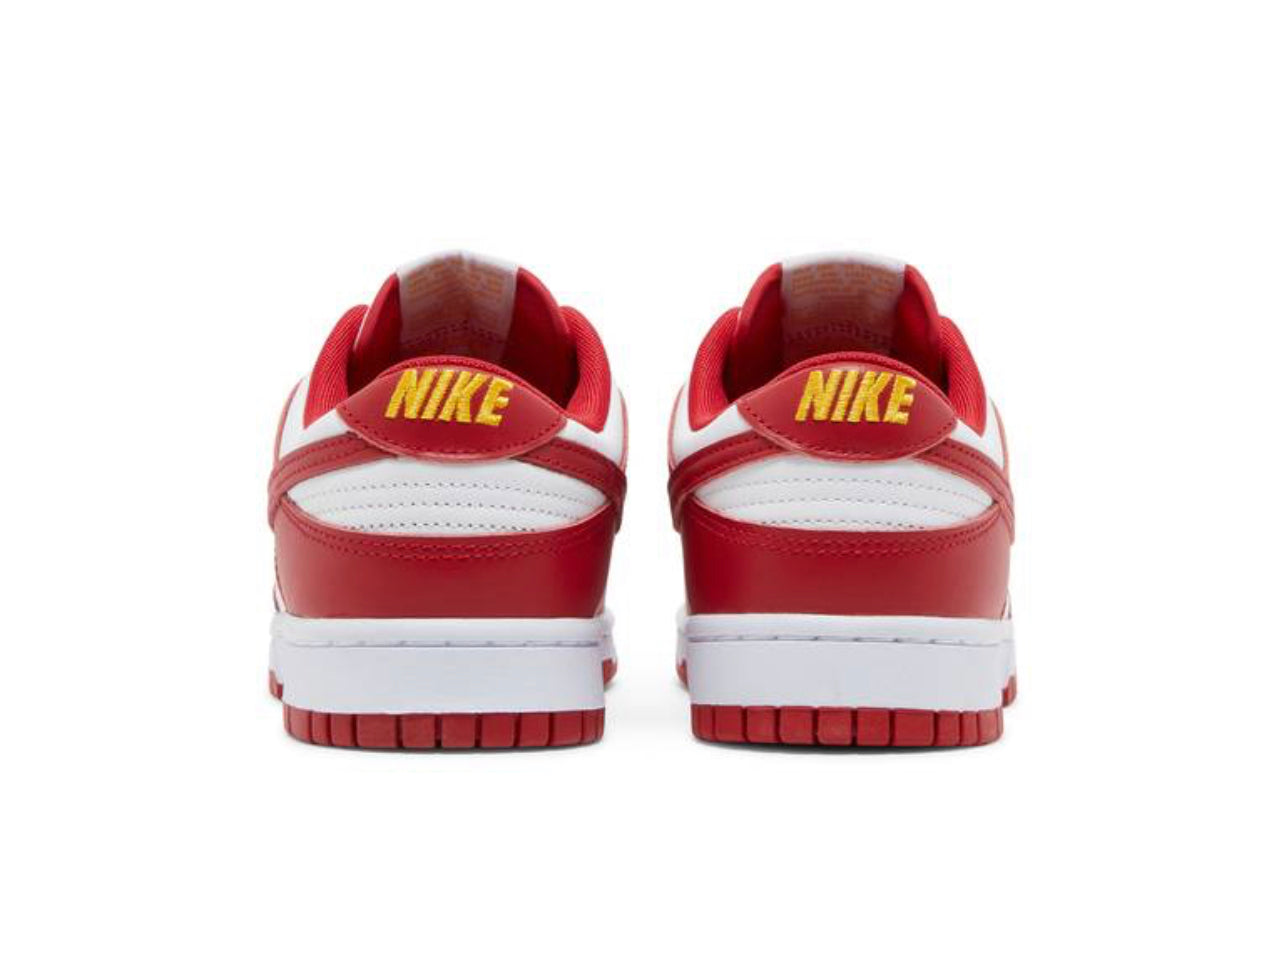 Nike Dunk Low “Gym Red"